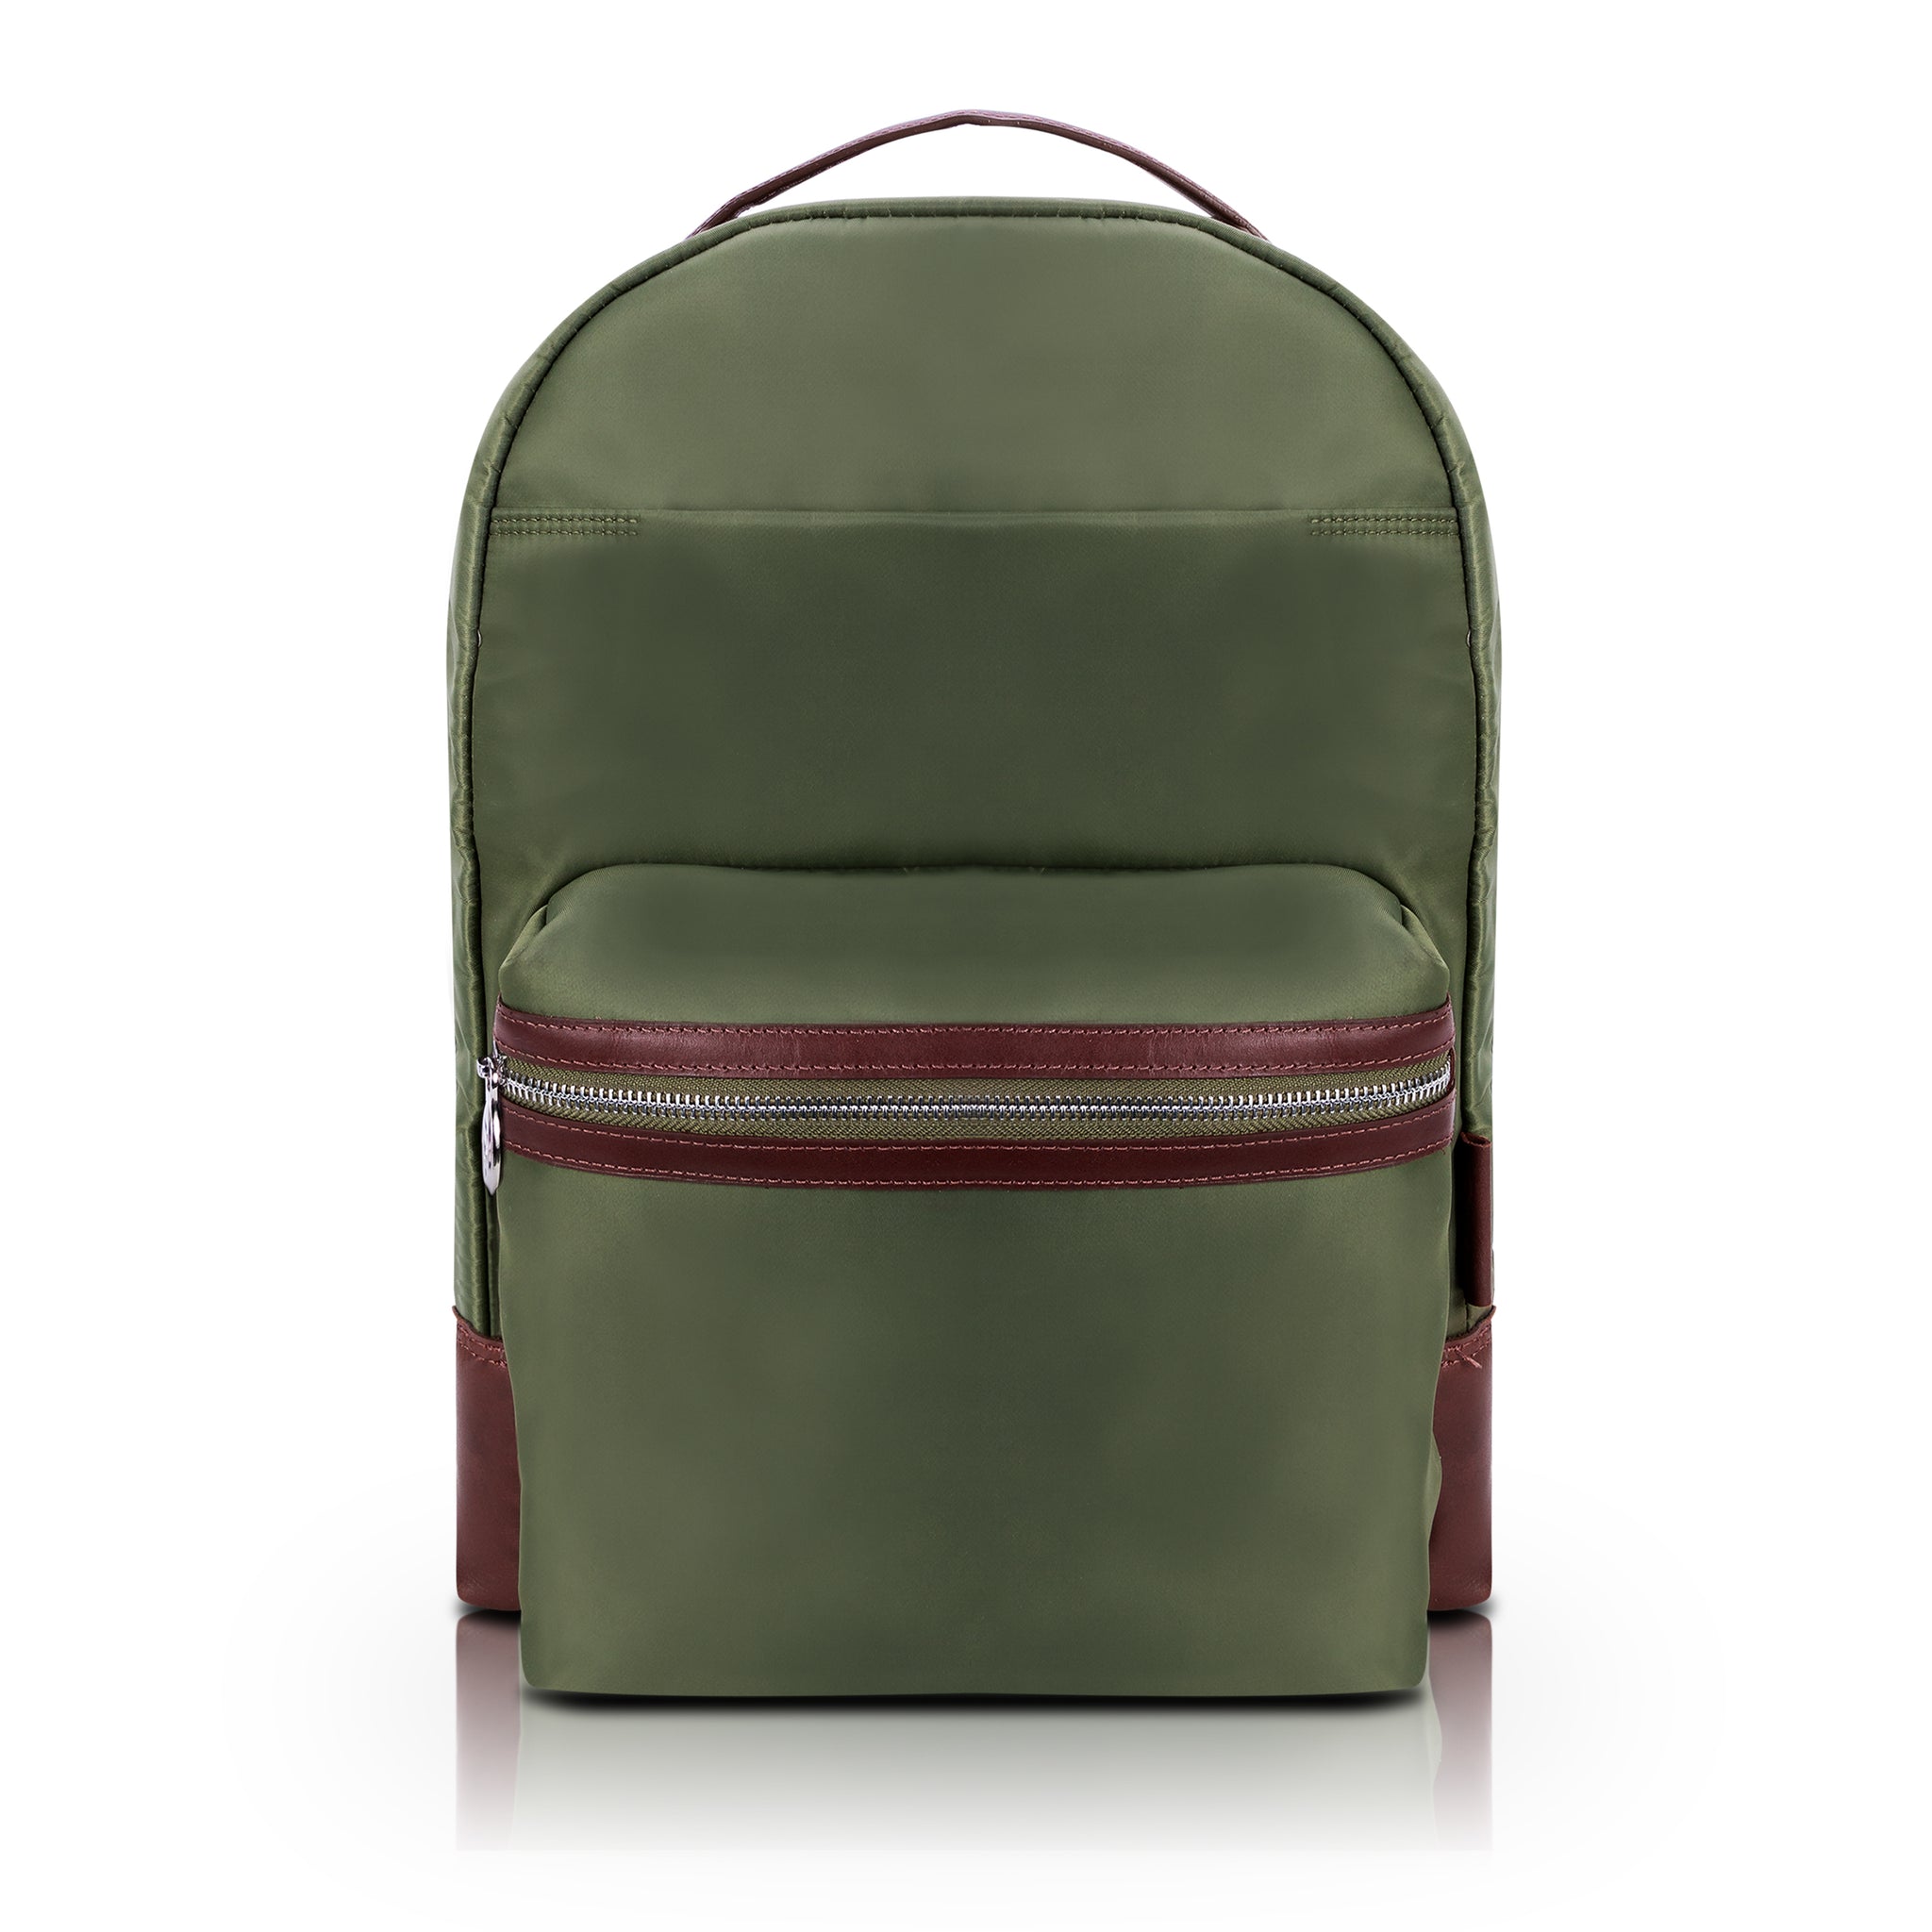 Parker: 15” Green Nylon Dual-Compartment Backpack